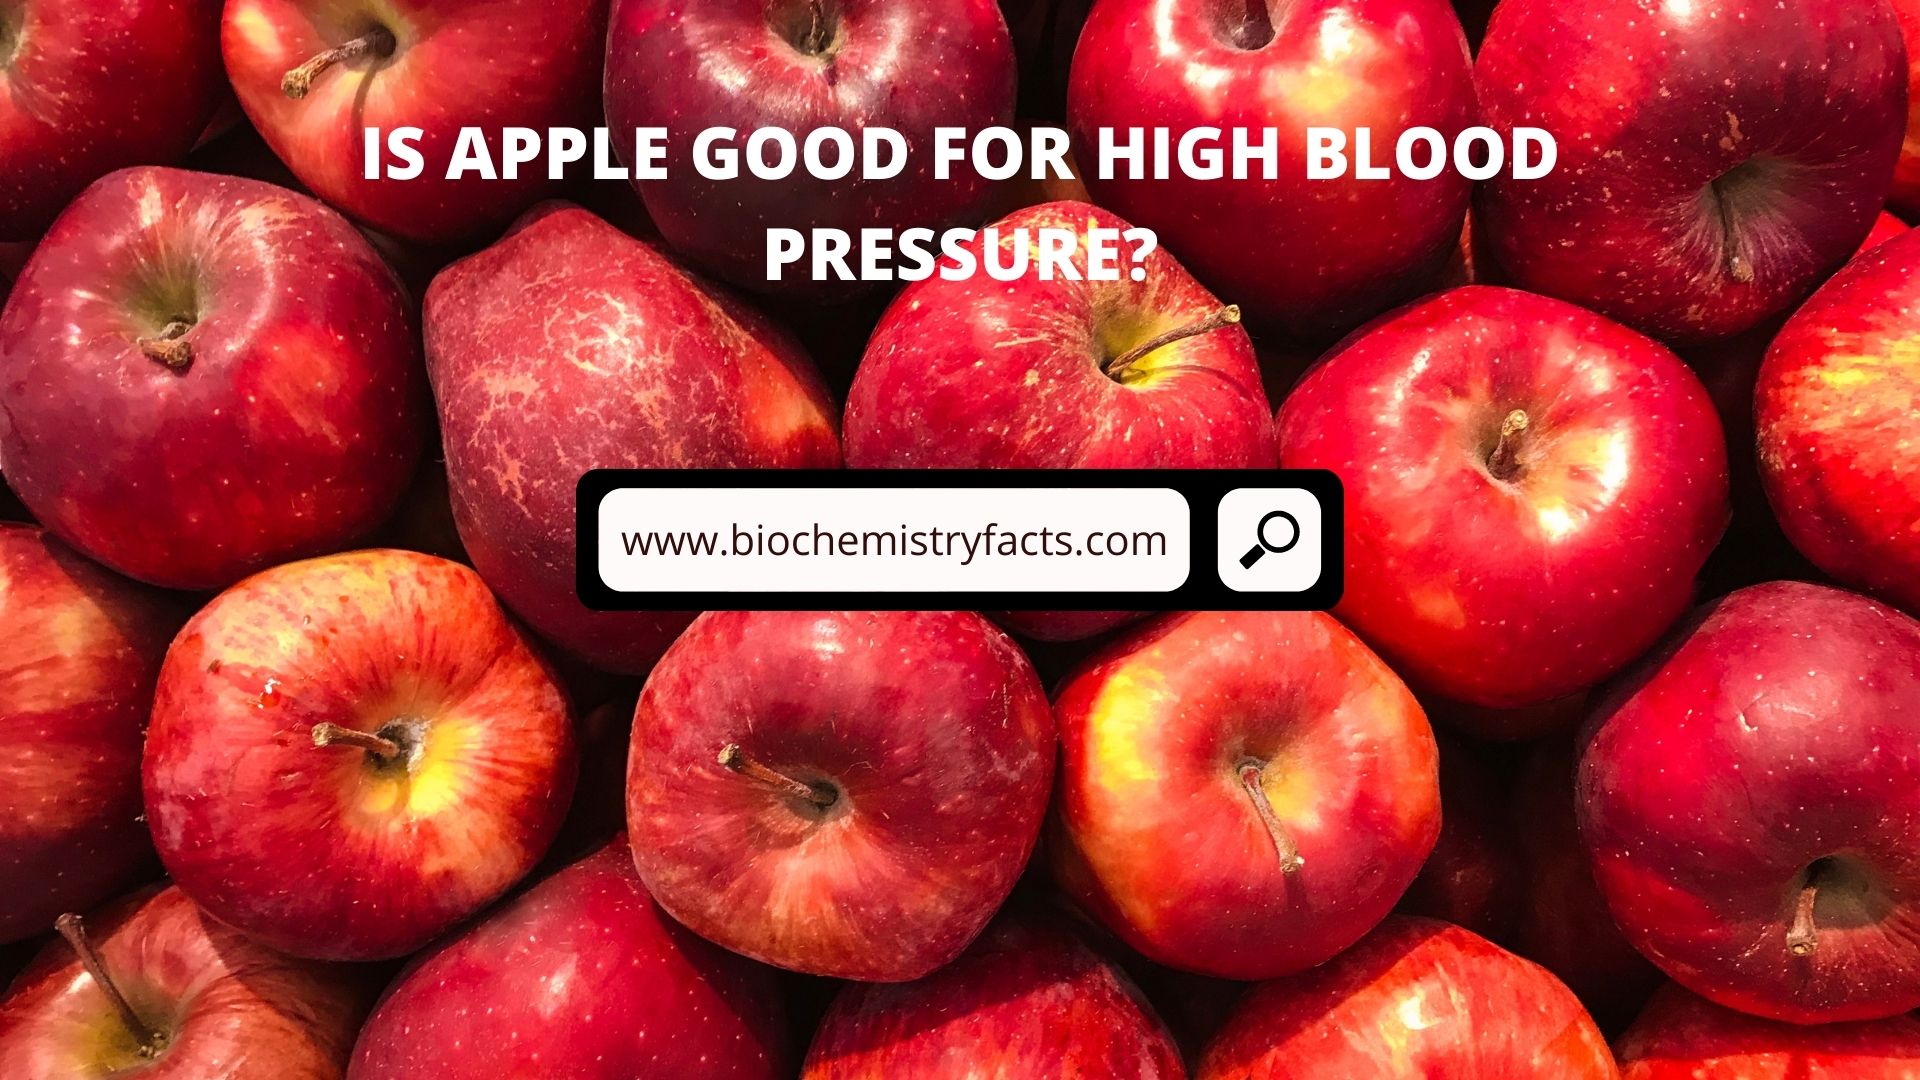 IS APPLE GOOD FOR HIGH BLOOD PRESSURE?